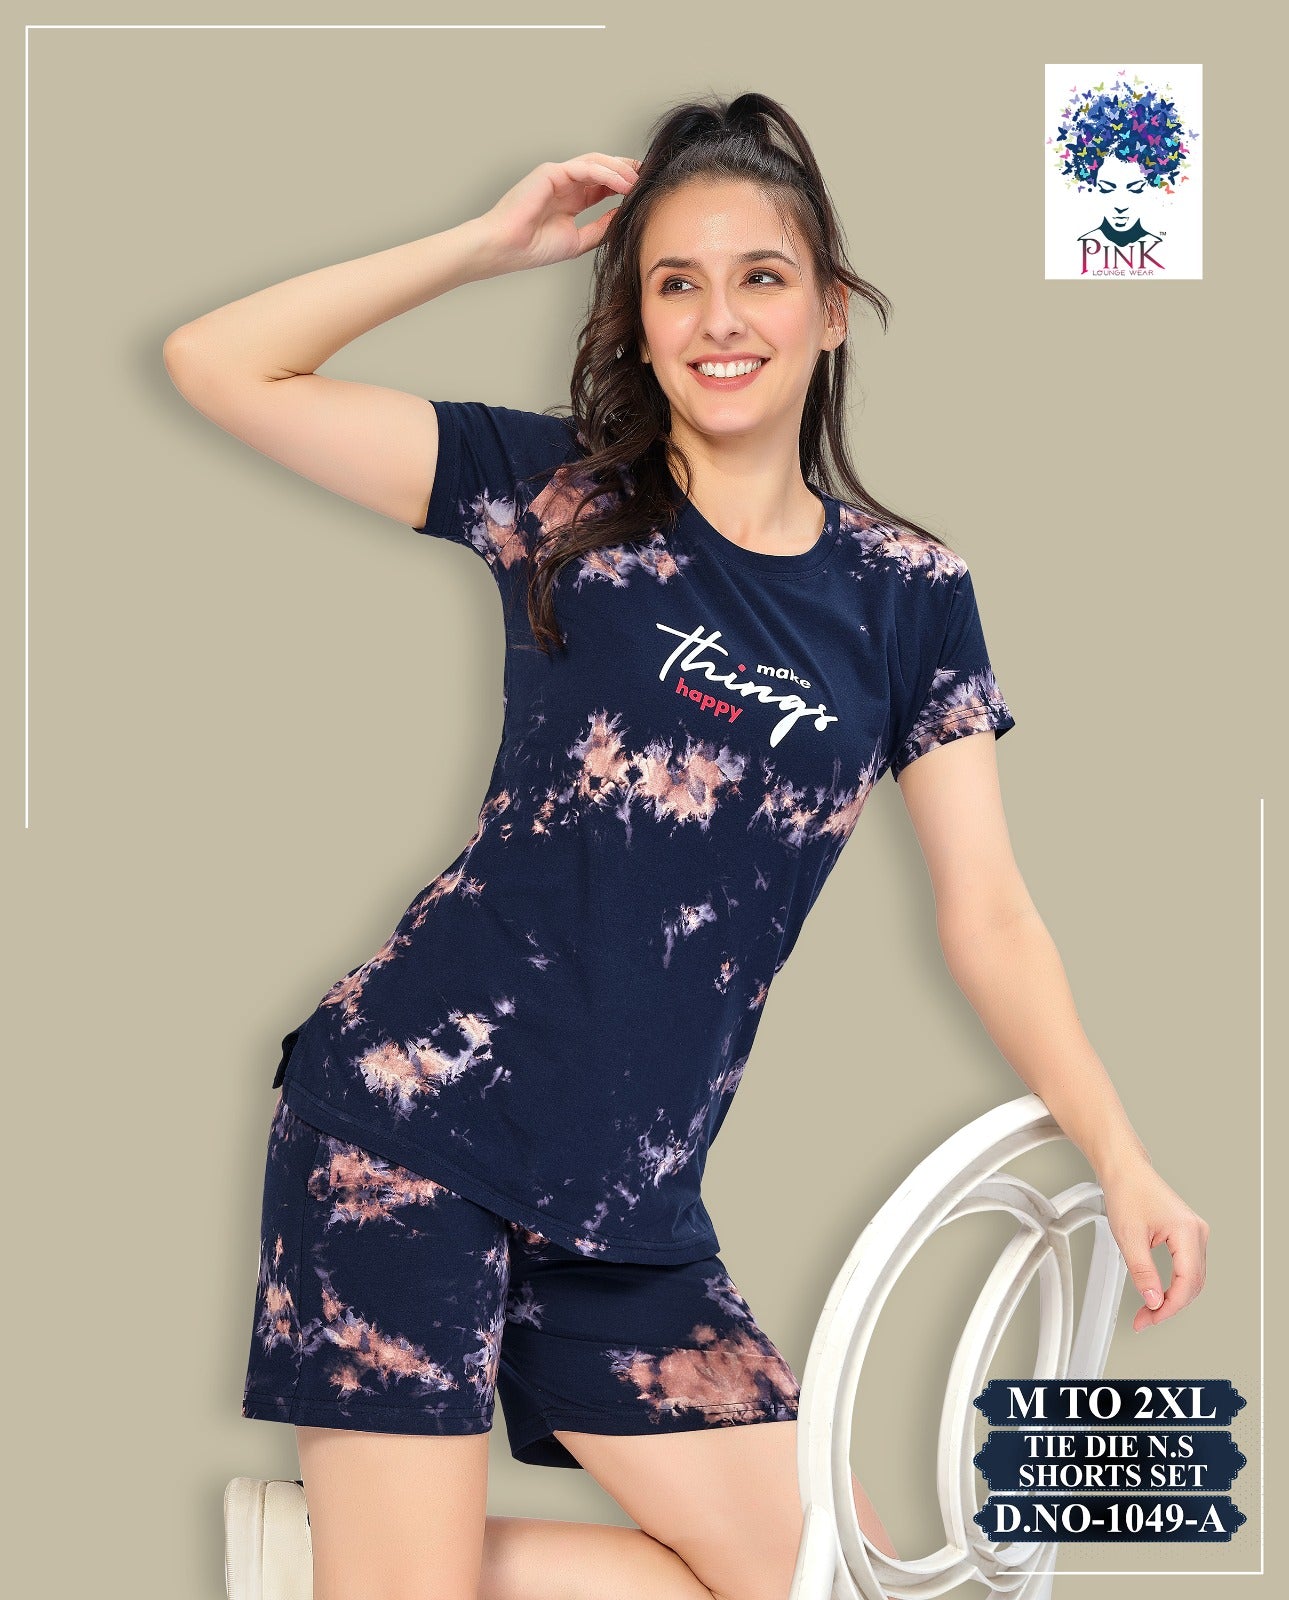 1049-A Pink Tie Dye Shorts Night Suits Wholesaler Ahmedabad